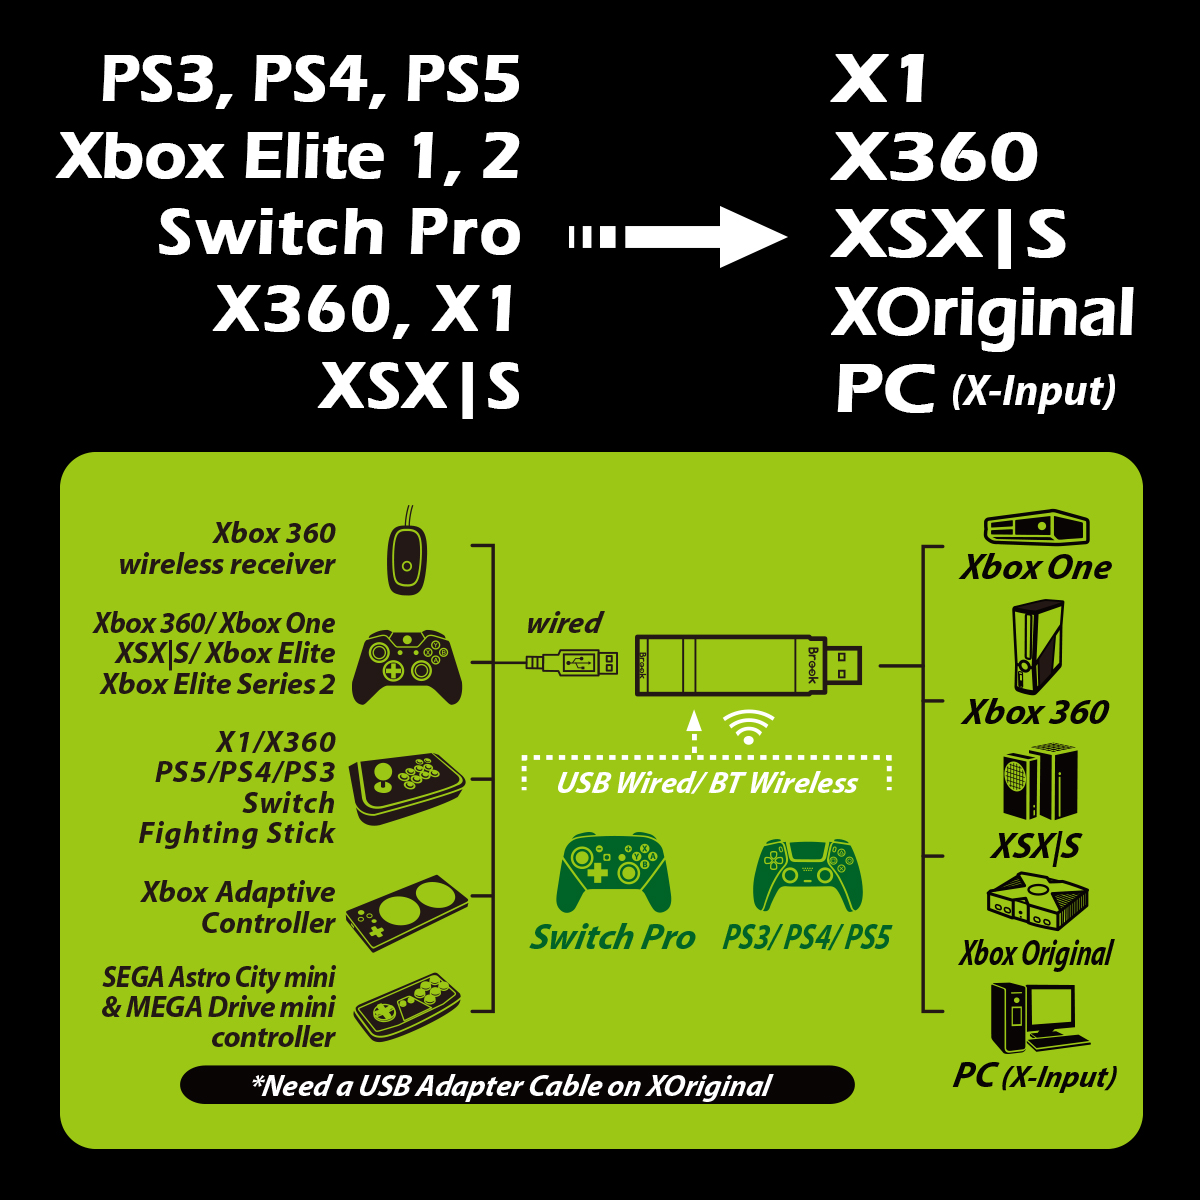 PS3 Vs. Xbox 360 Features